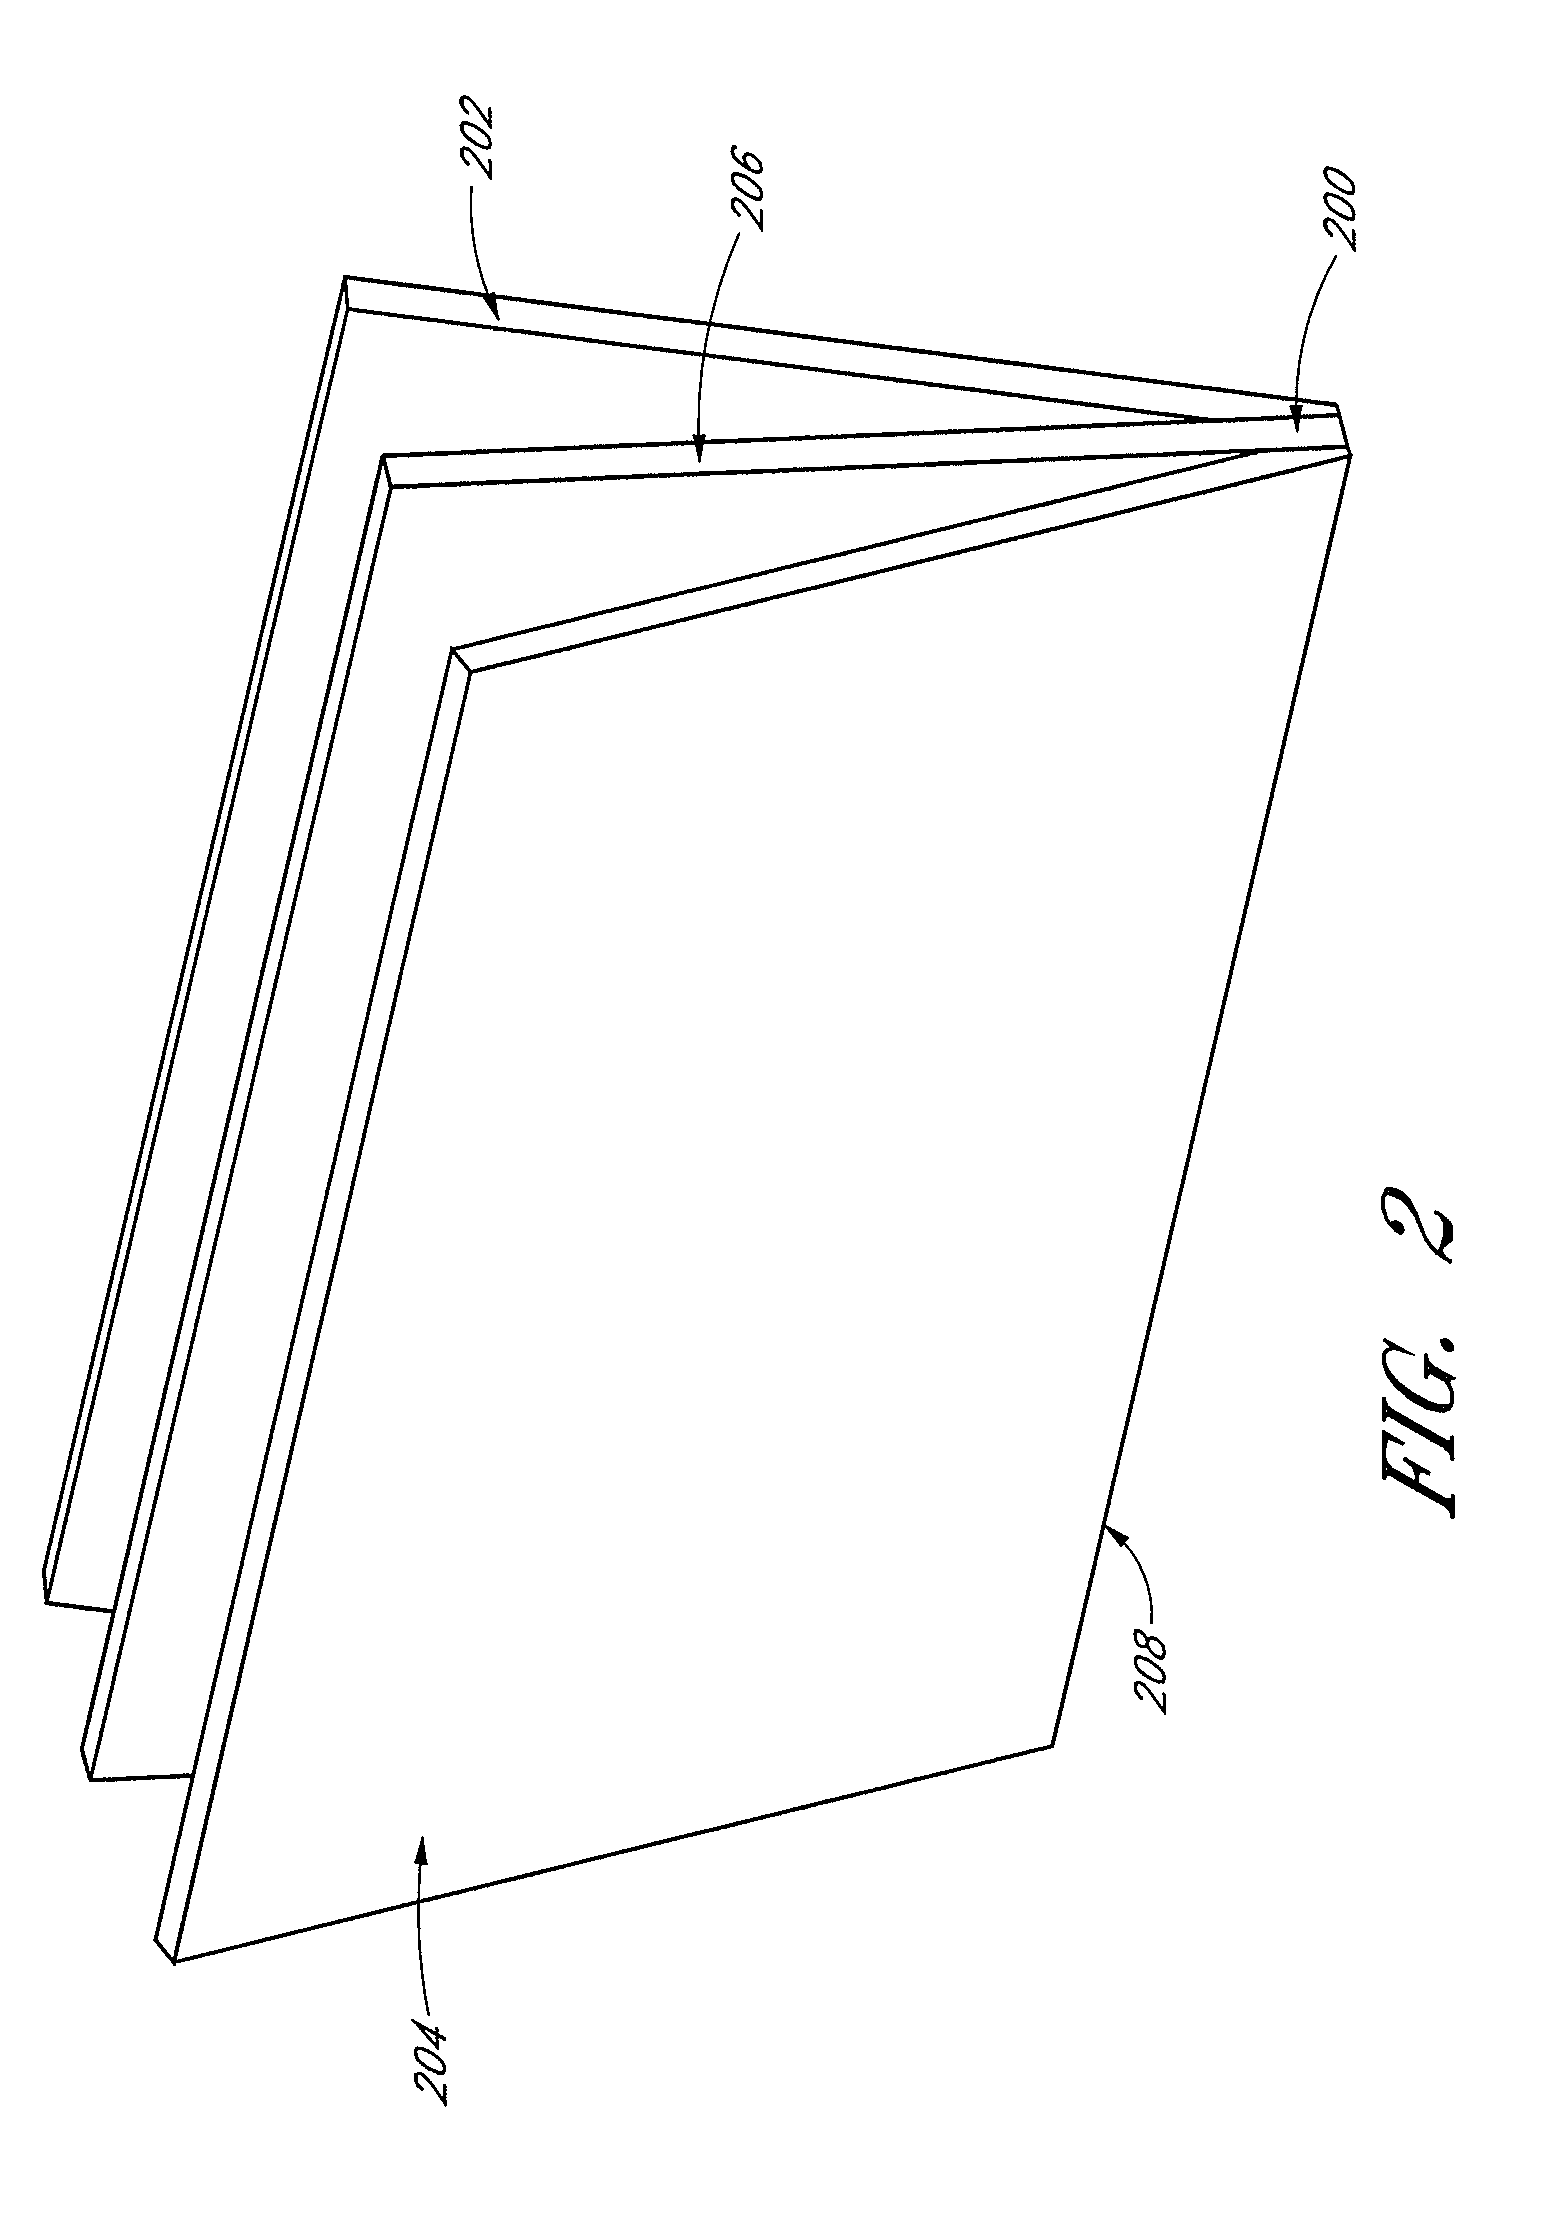 Anti-rotation device and method of use